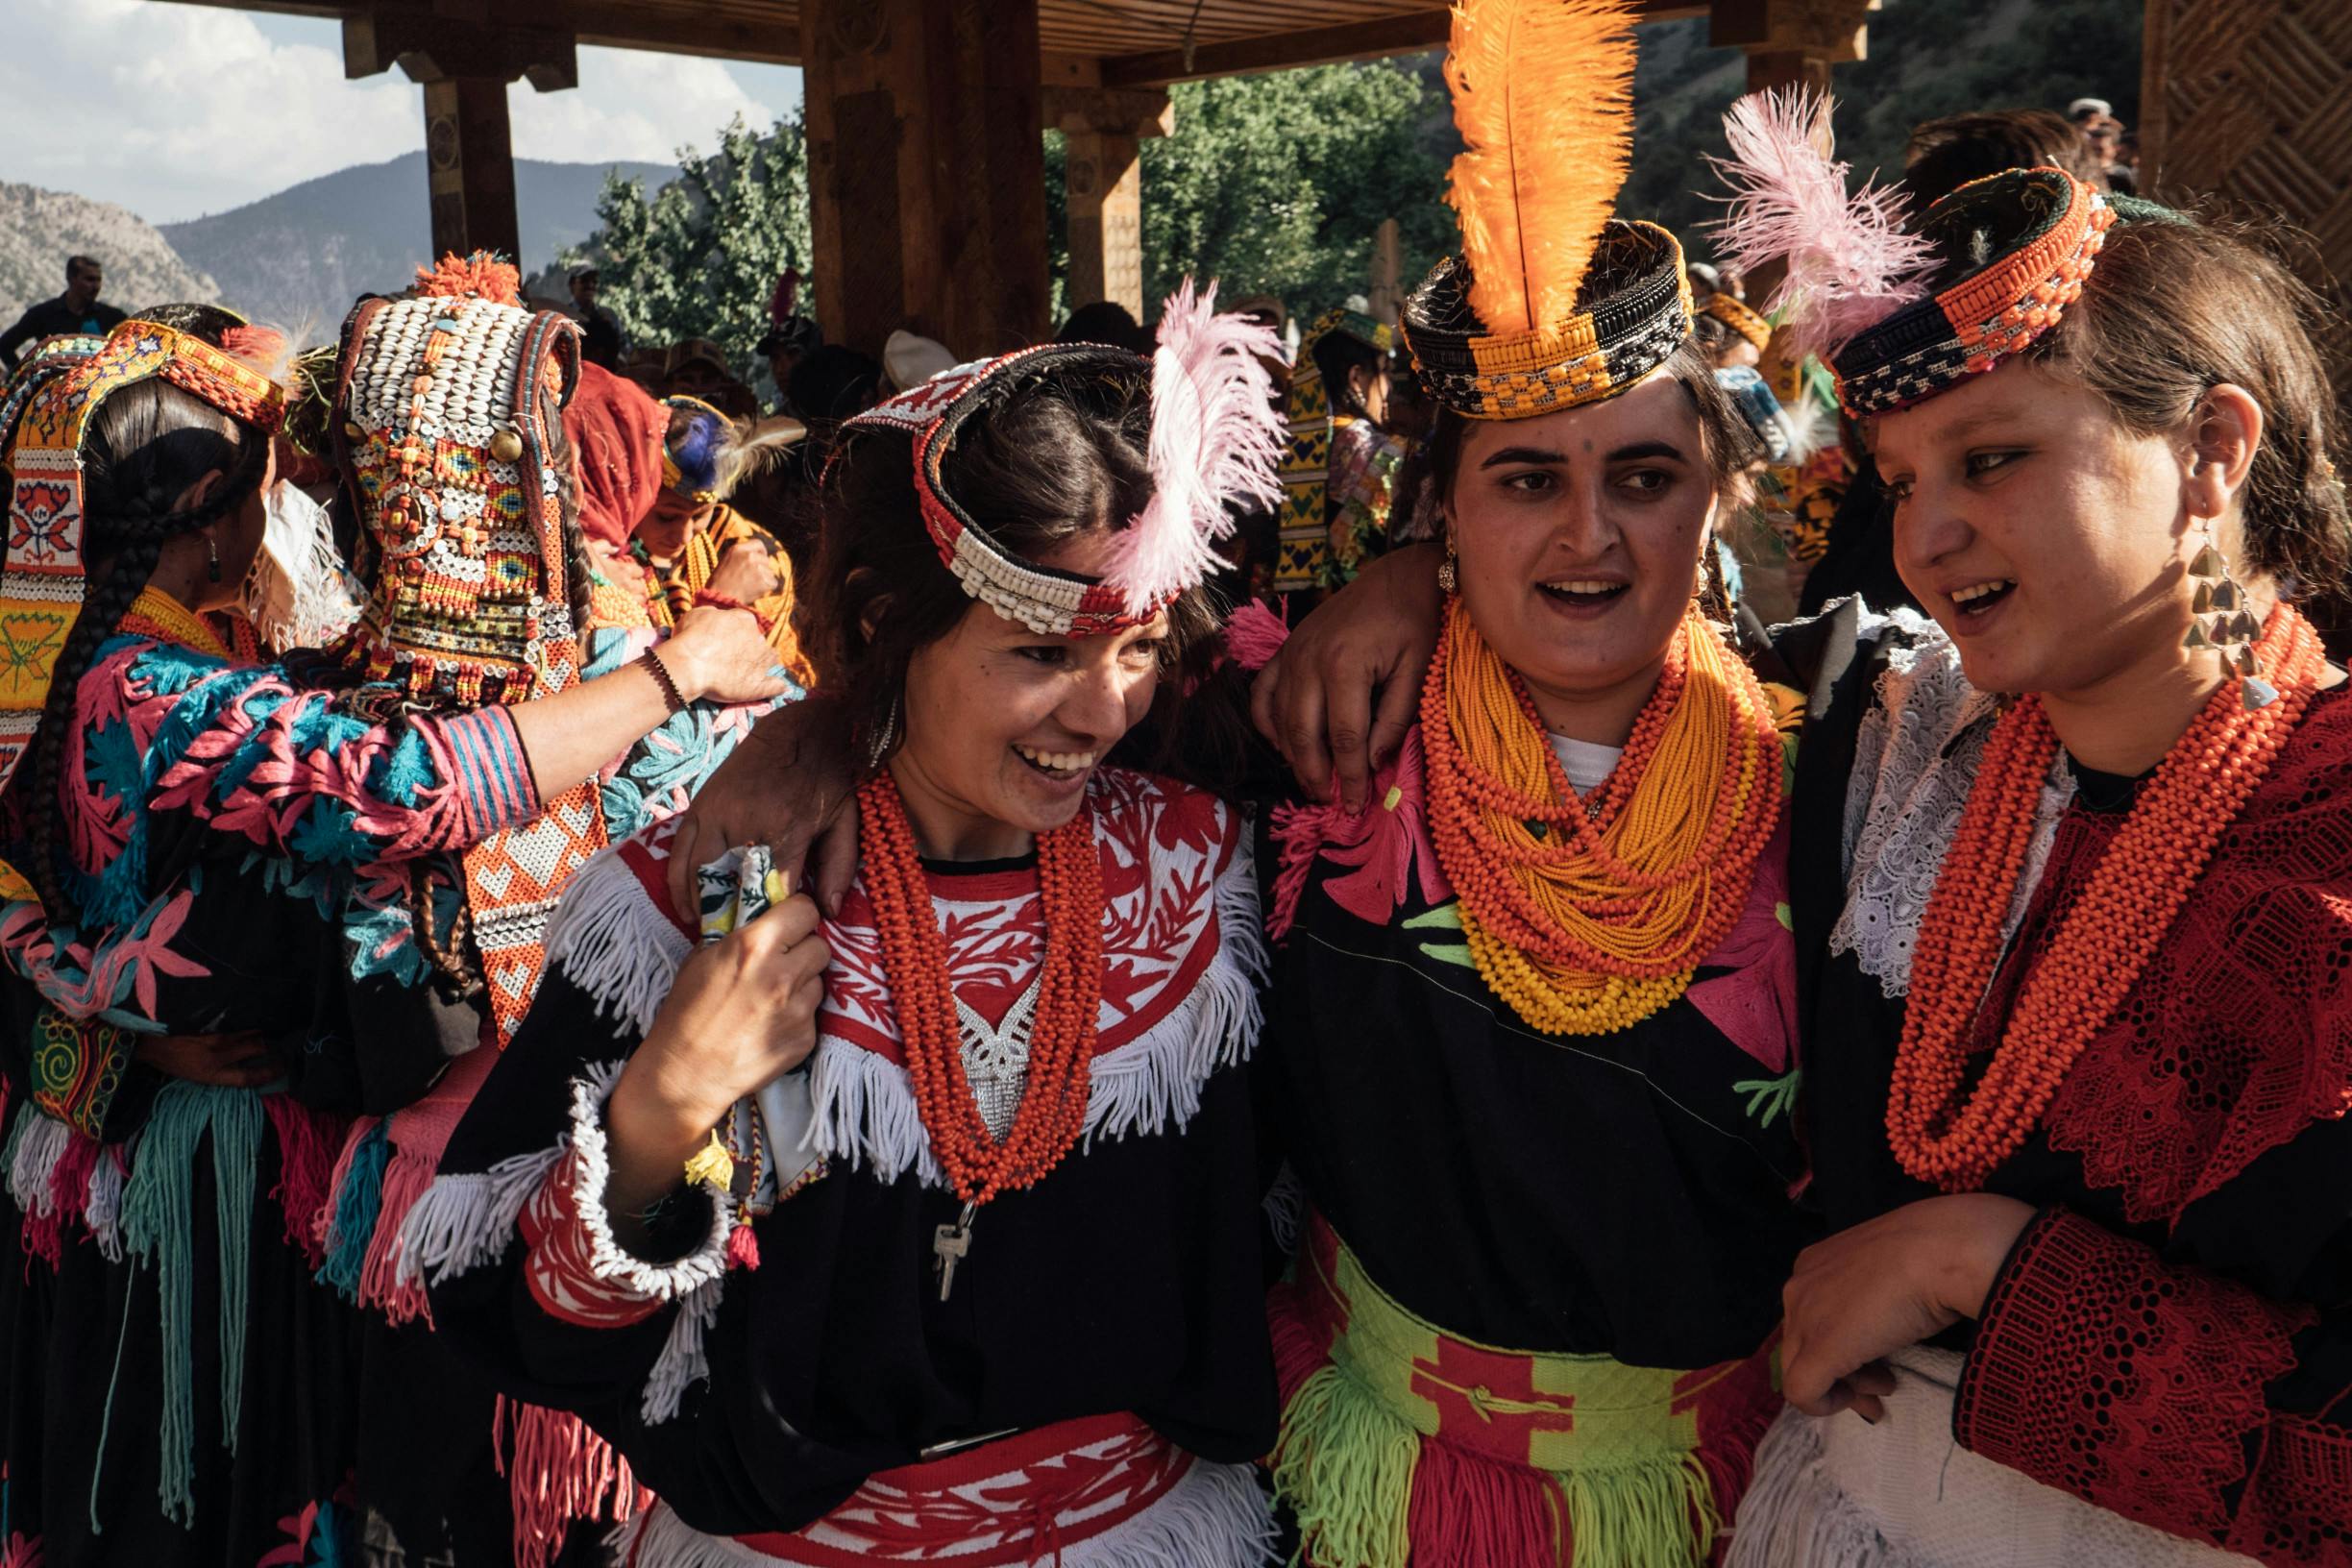 Kalash girls dance in pirouettes to celebrate the Uchal festival (Usman Ahmad)